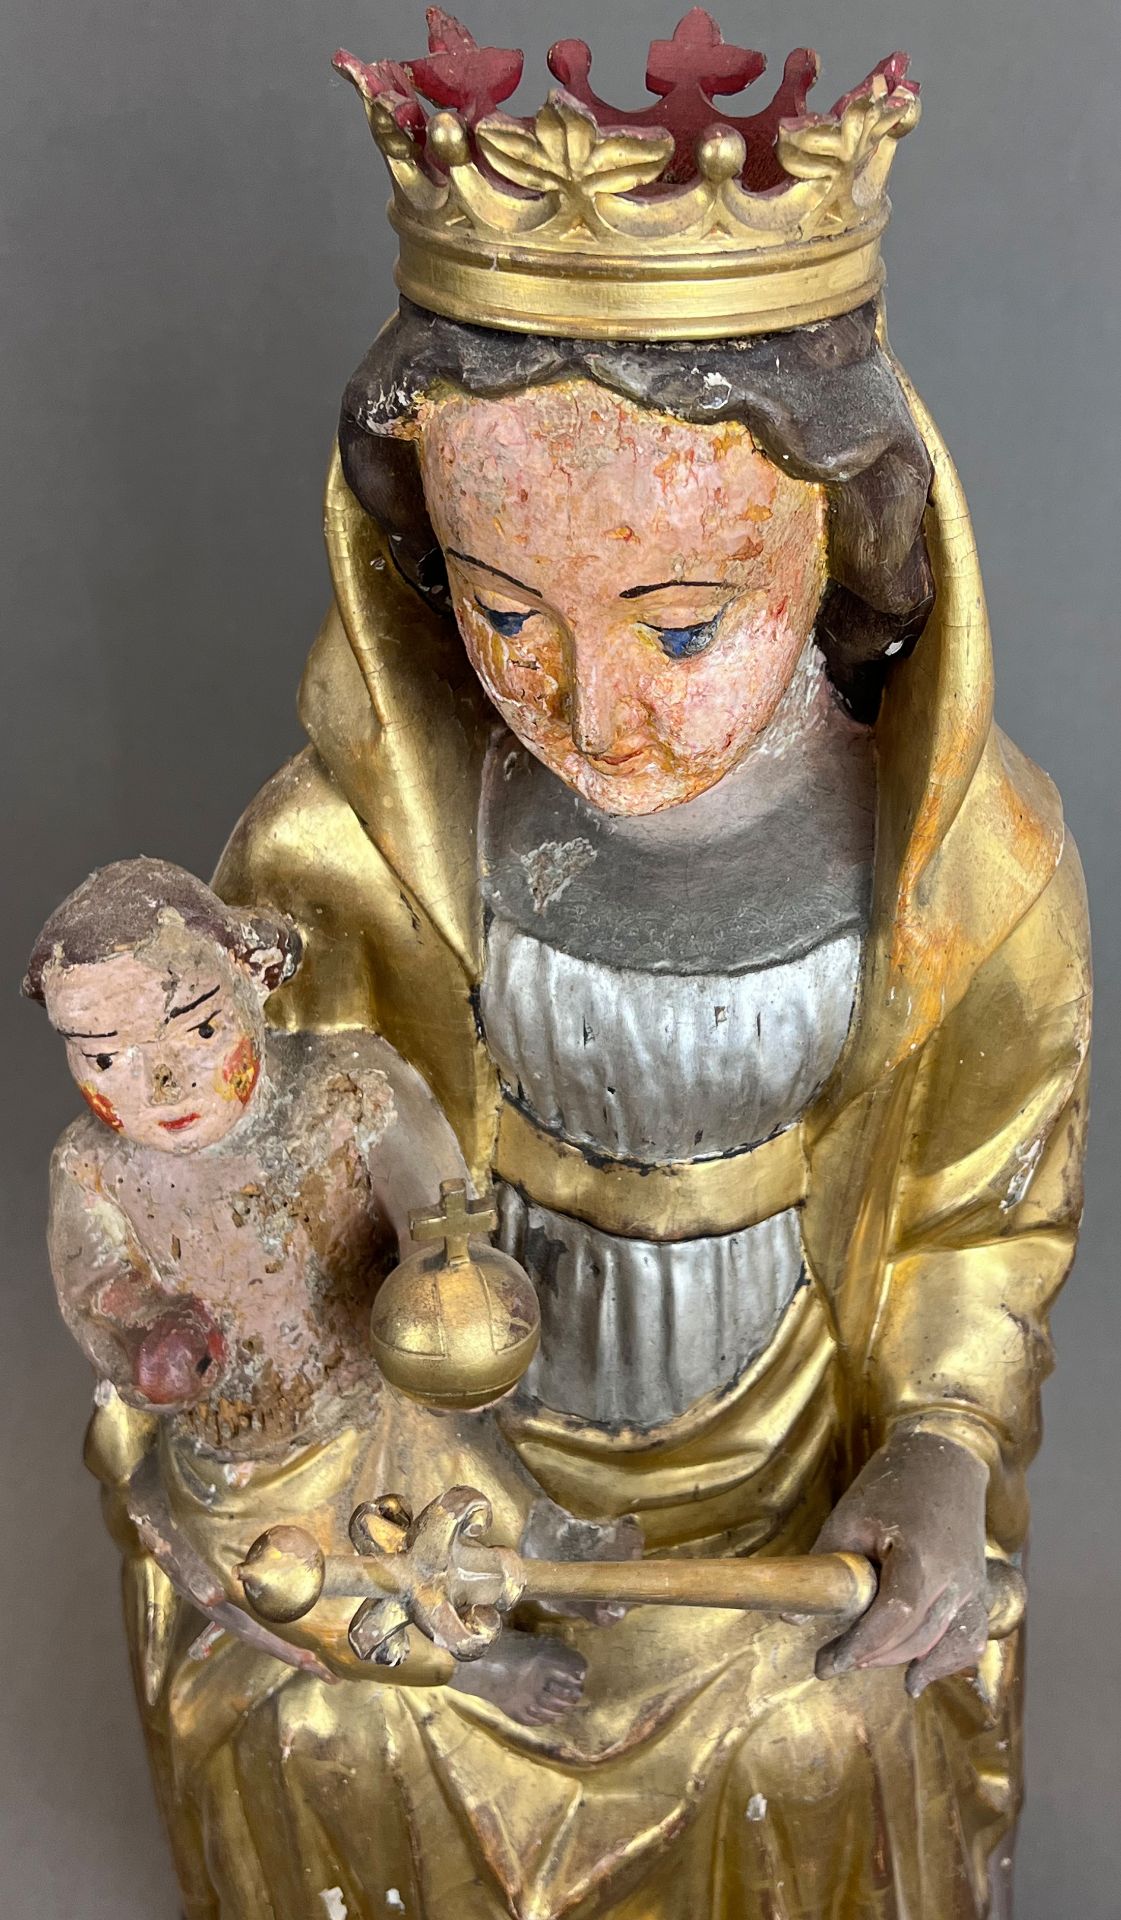 Wooden figure. Virgin Mary with Christ Child. Around 1700. South Germany. - Image 5 of 10